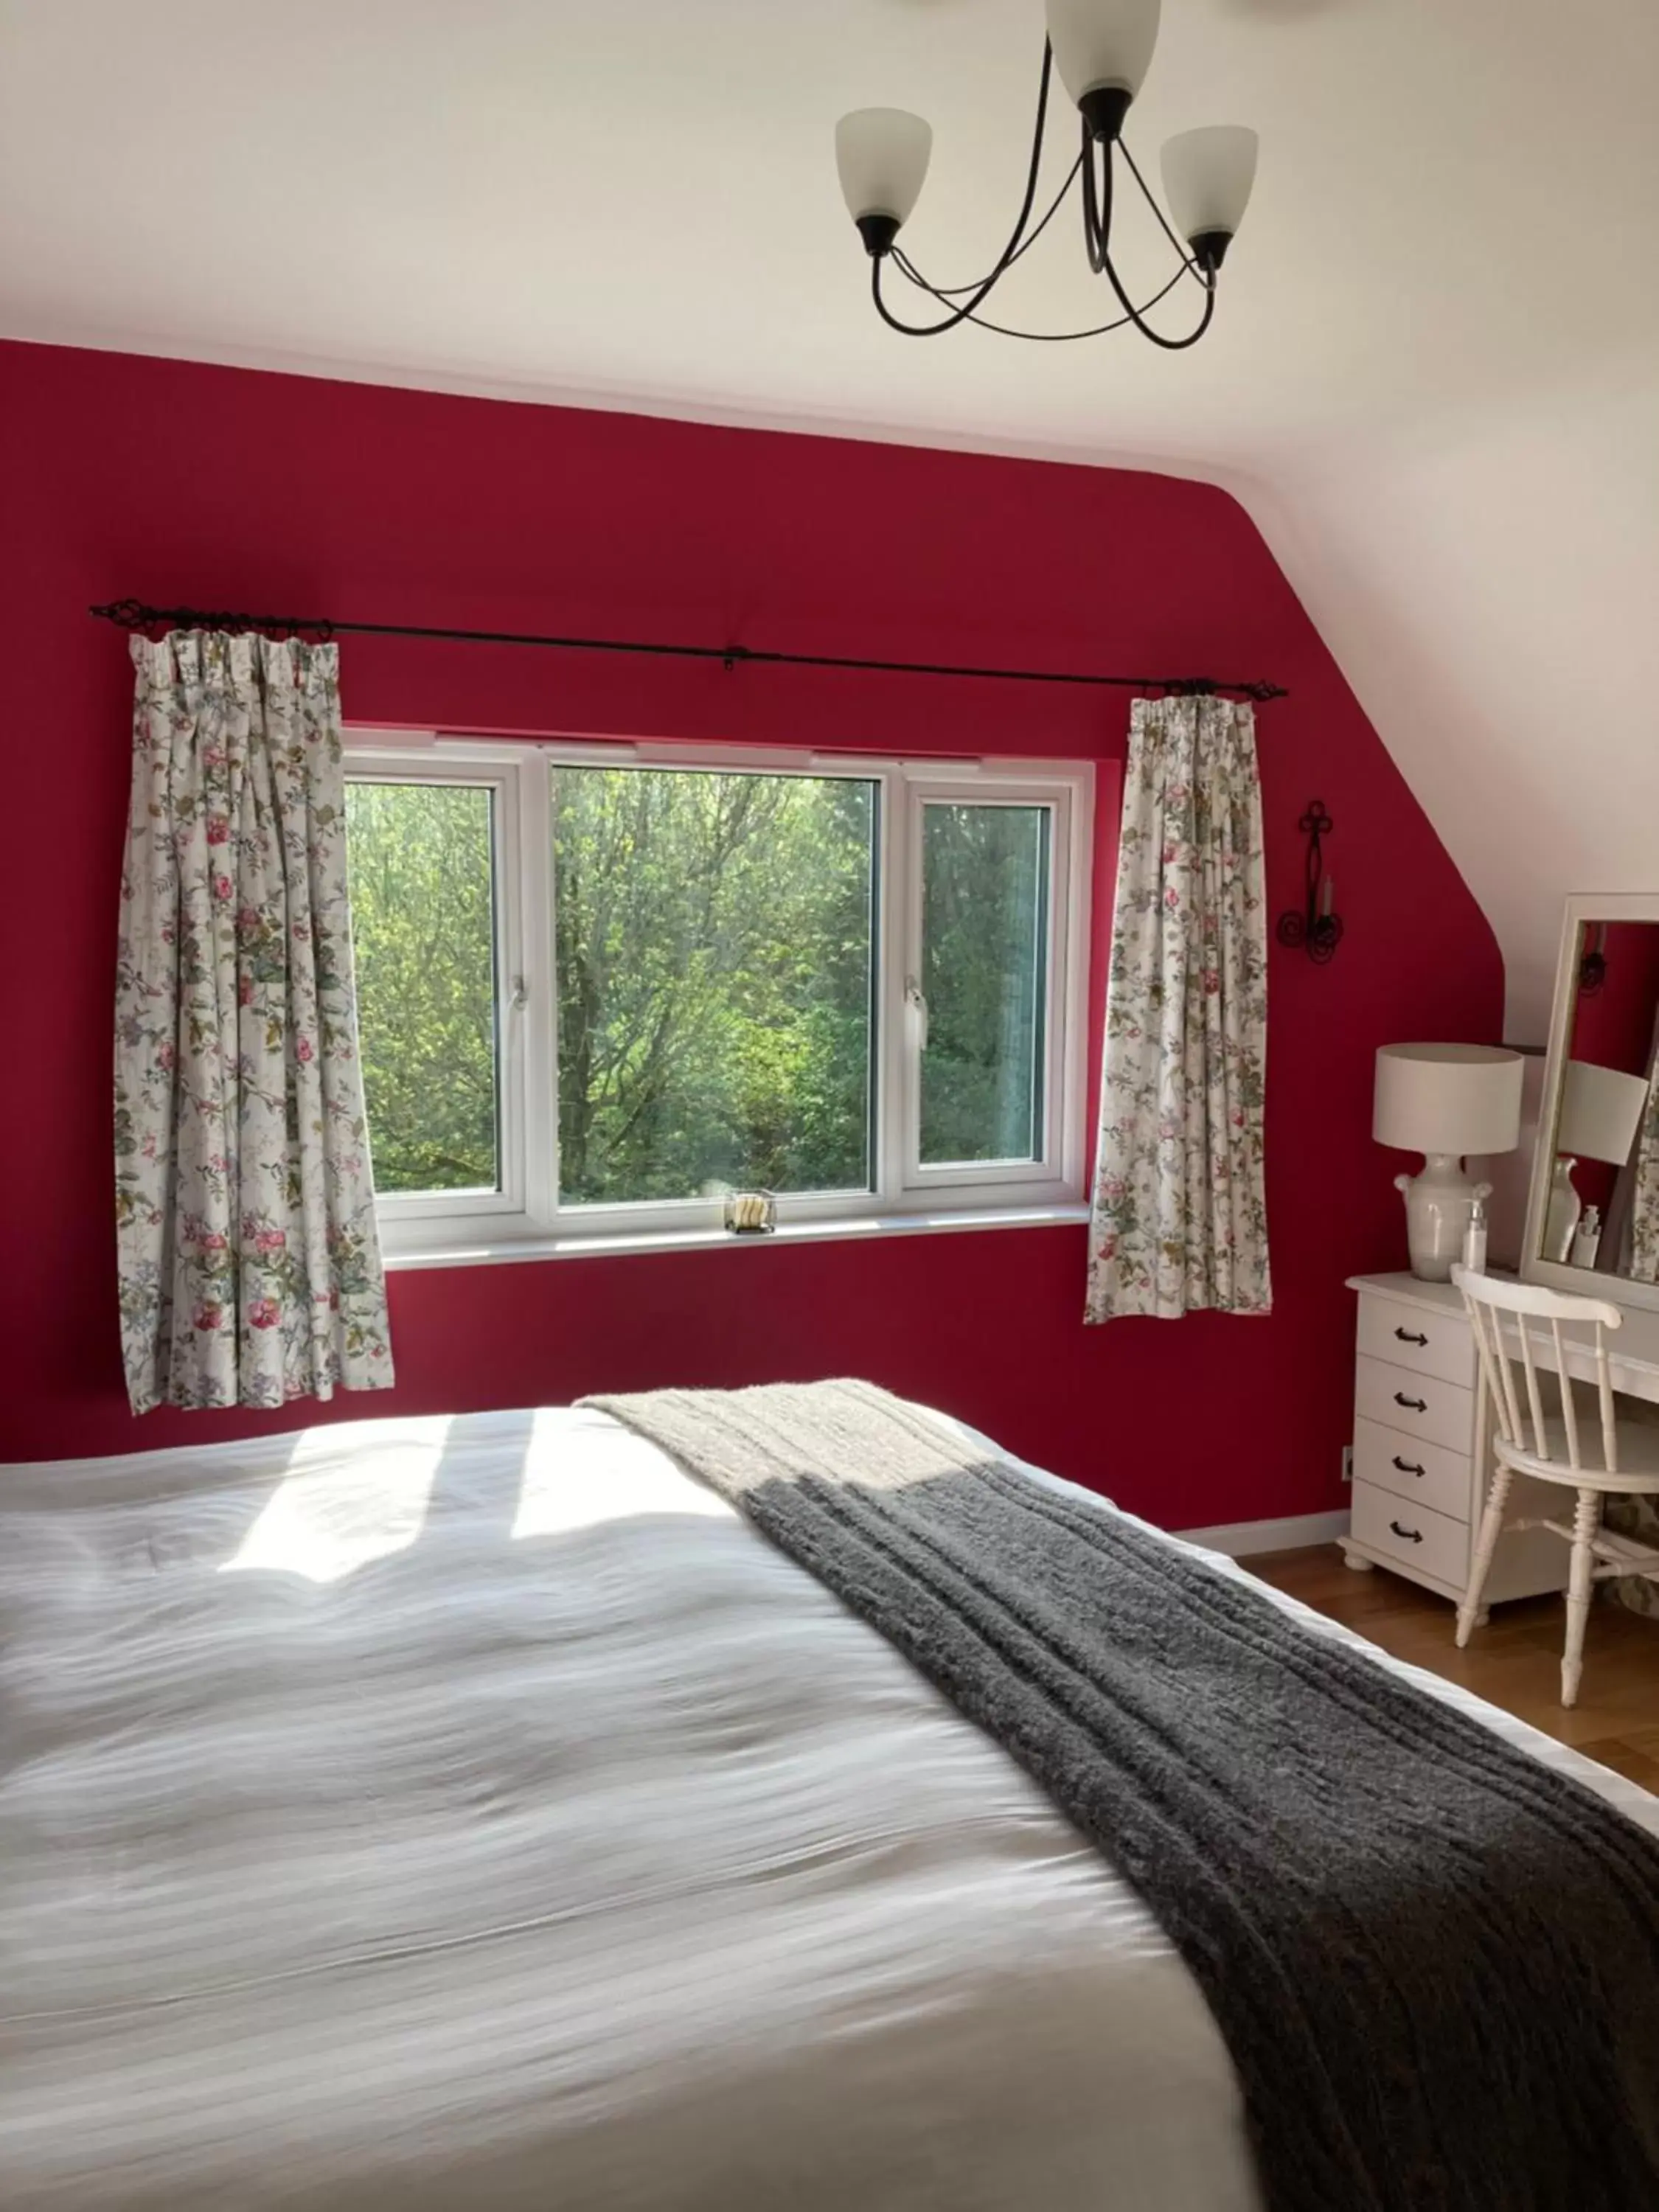 Deluxe Double or Twin Room with Garden View in Higher Trenear Farm B&B